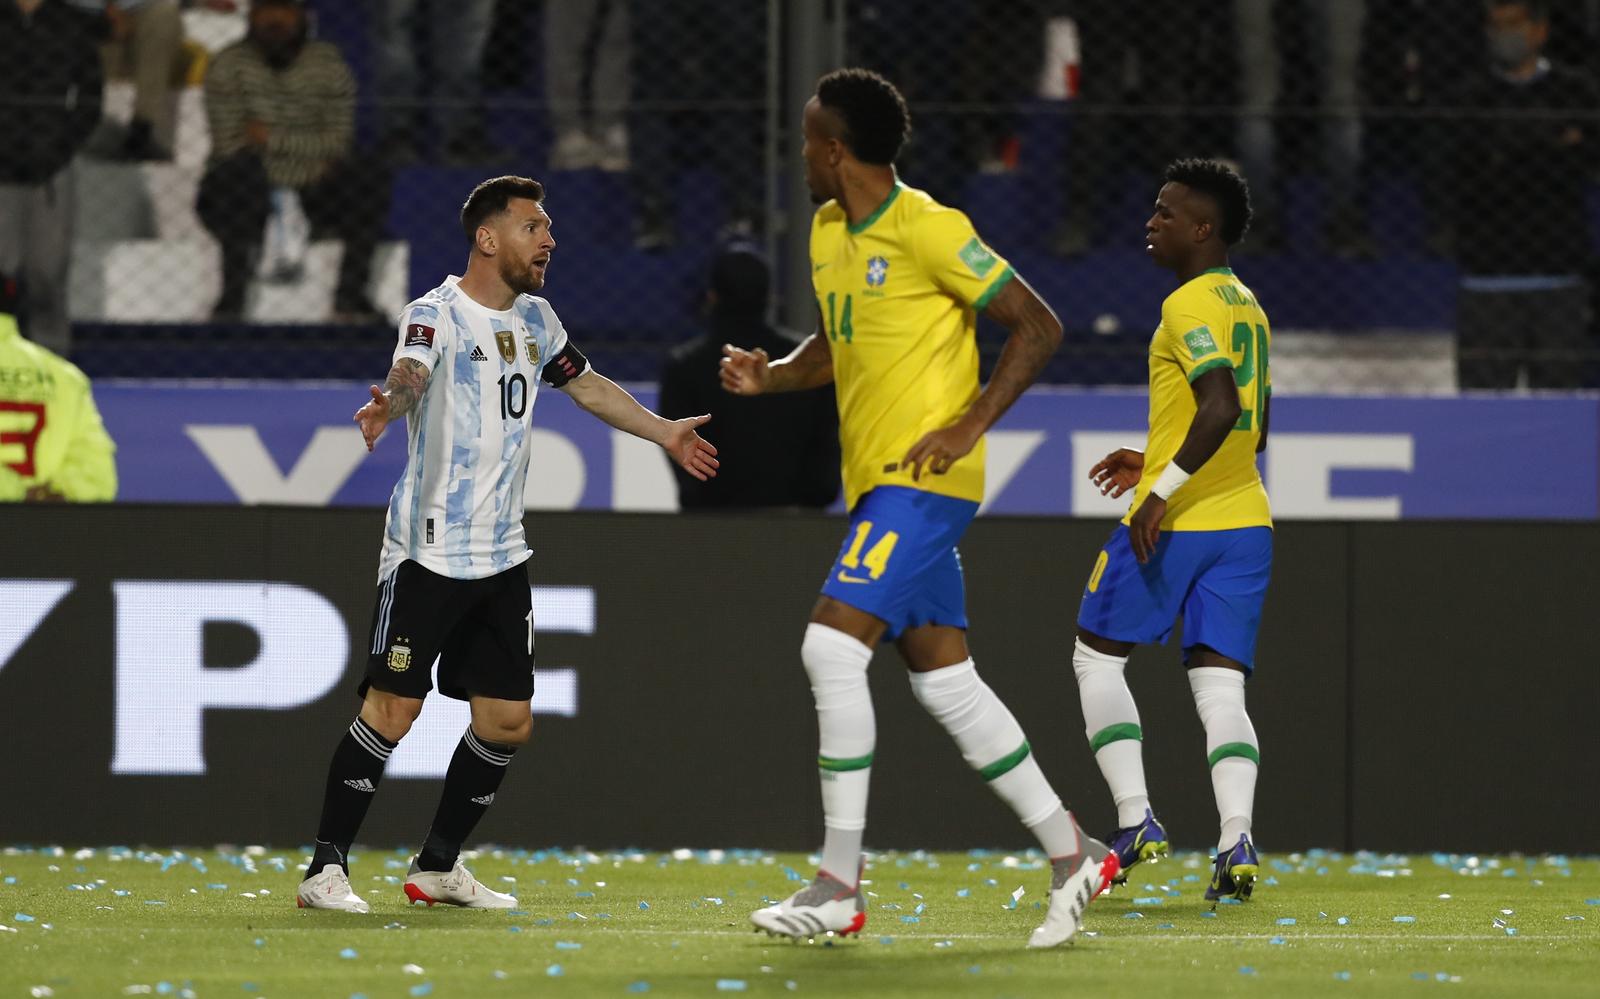 Argentina qualify for Qatar 2022 after 0-0 draw with Brazil